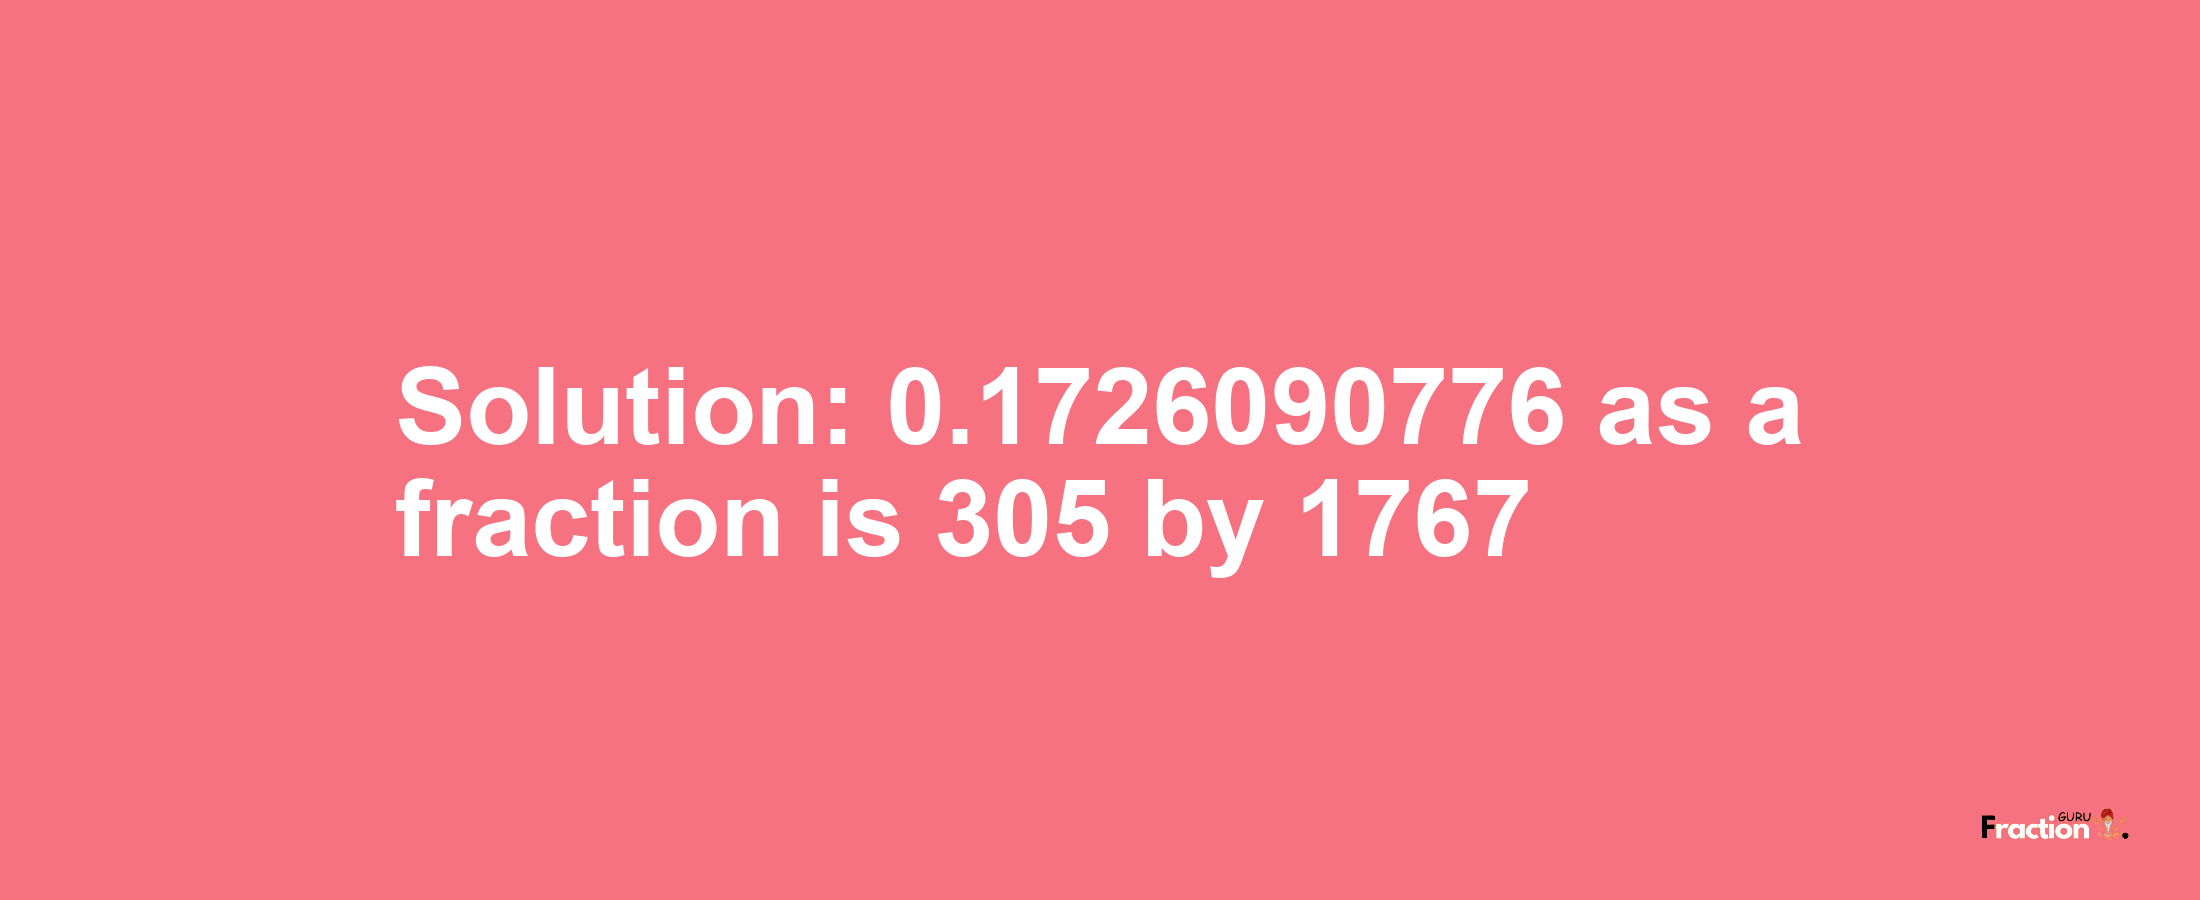 Solution:0.1726090776 as a fraction is 305/1767